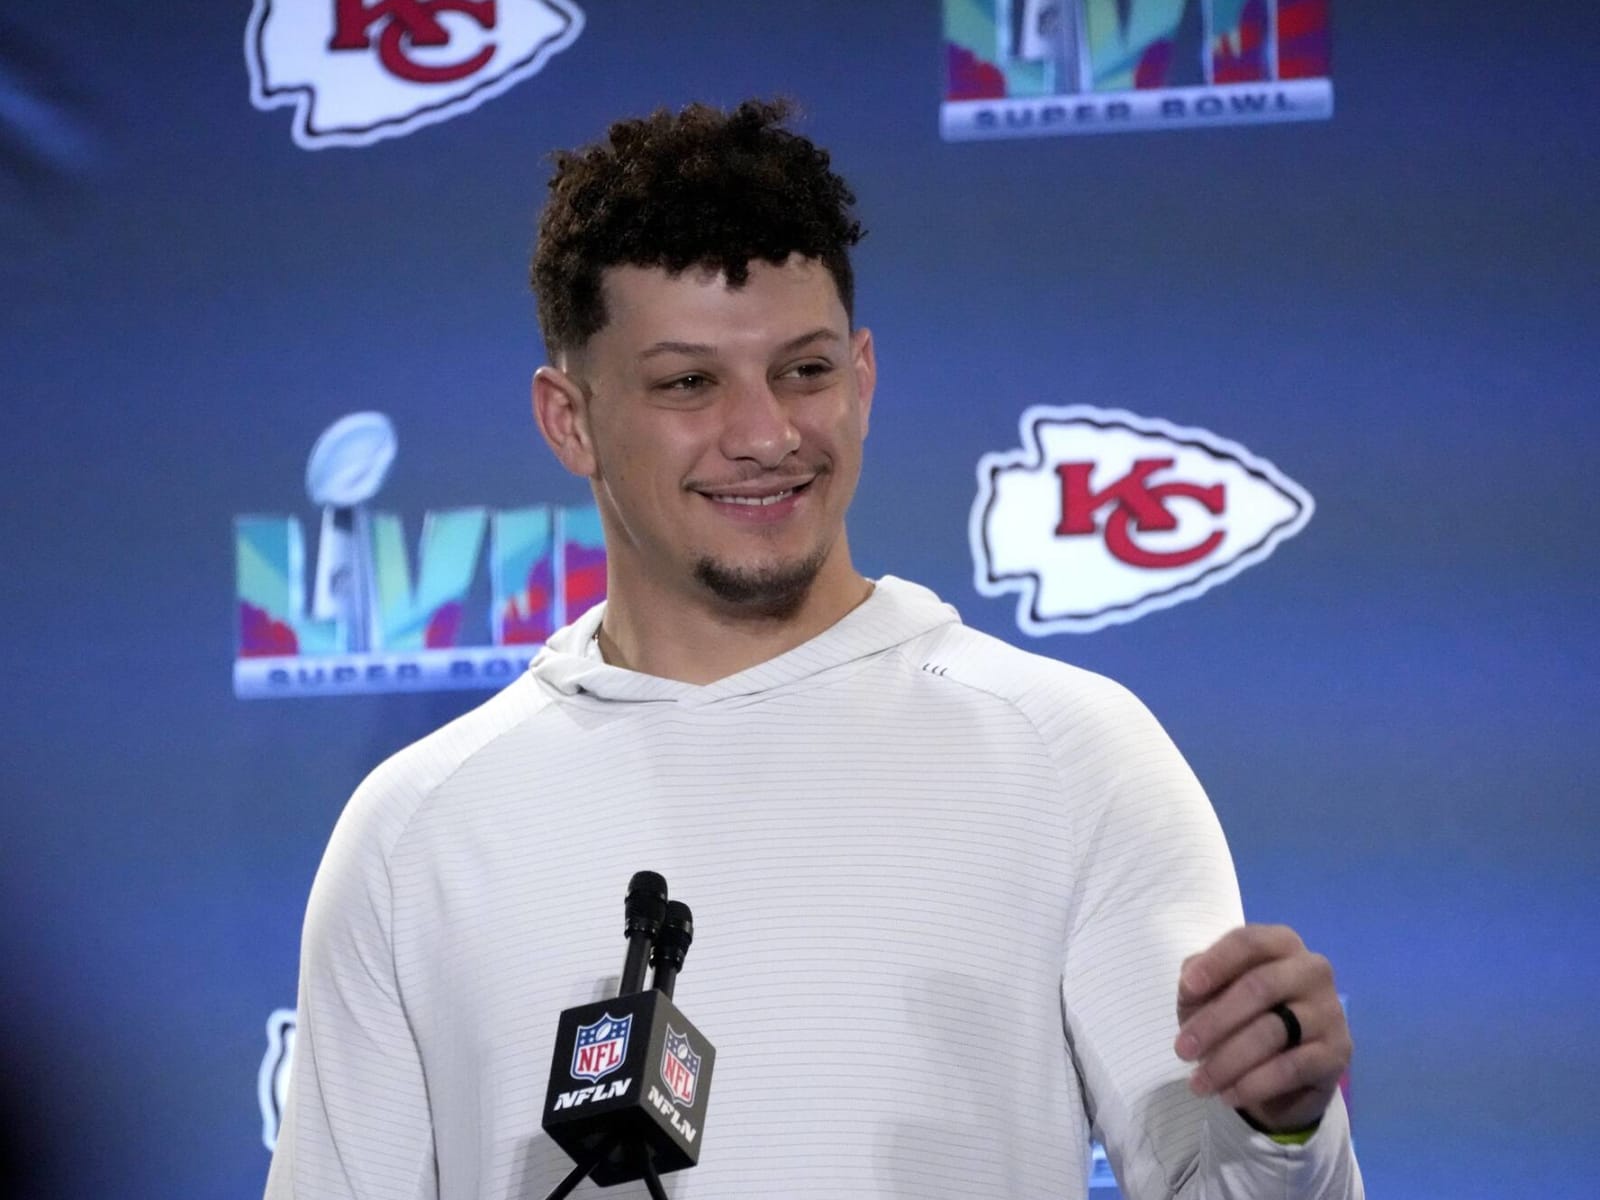 Patrick Mahomes inherited clutch gene from his major-league dad - ESPN